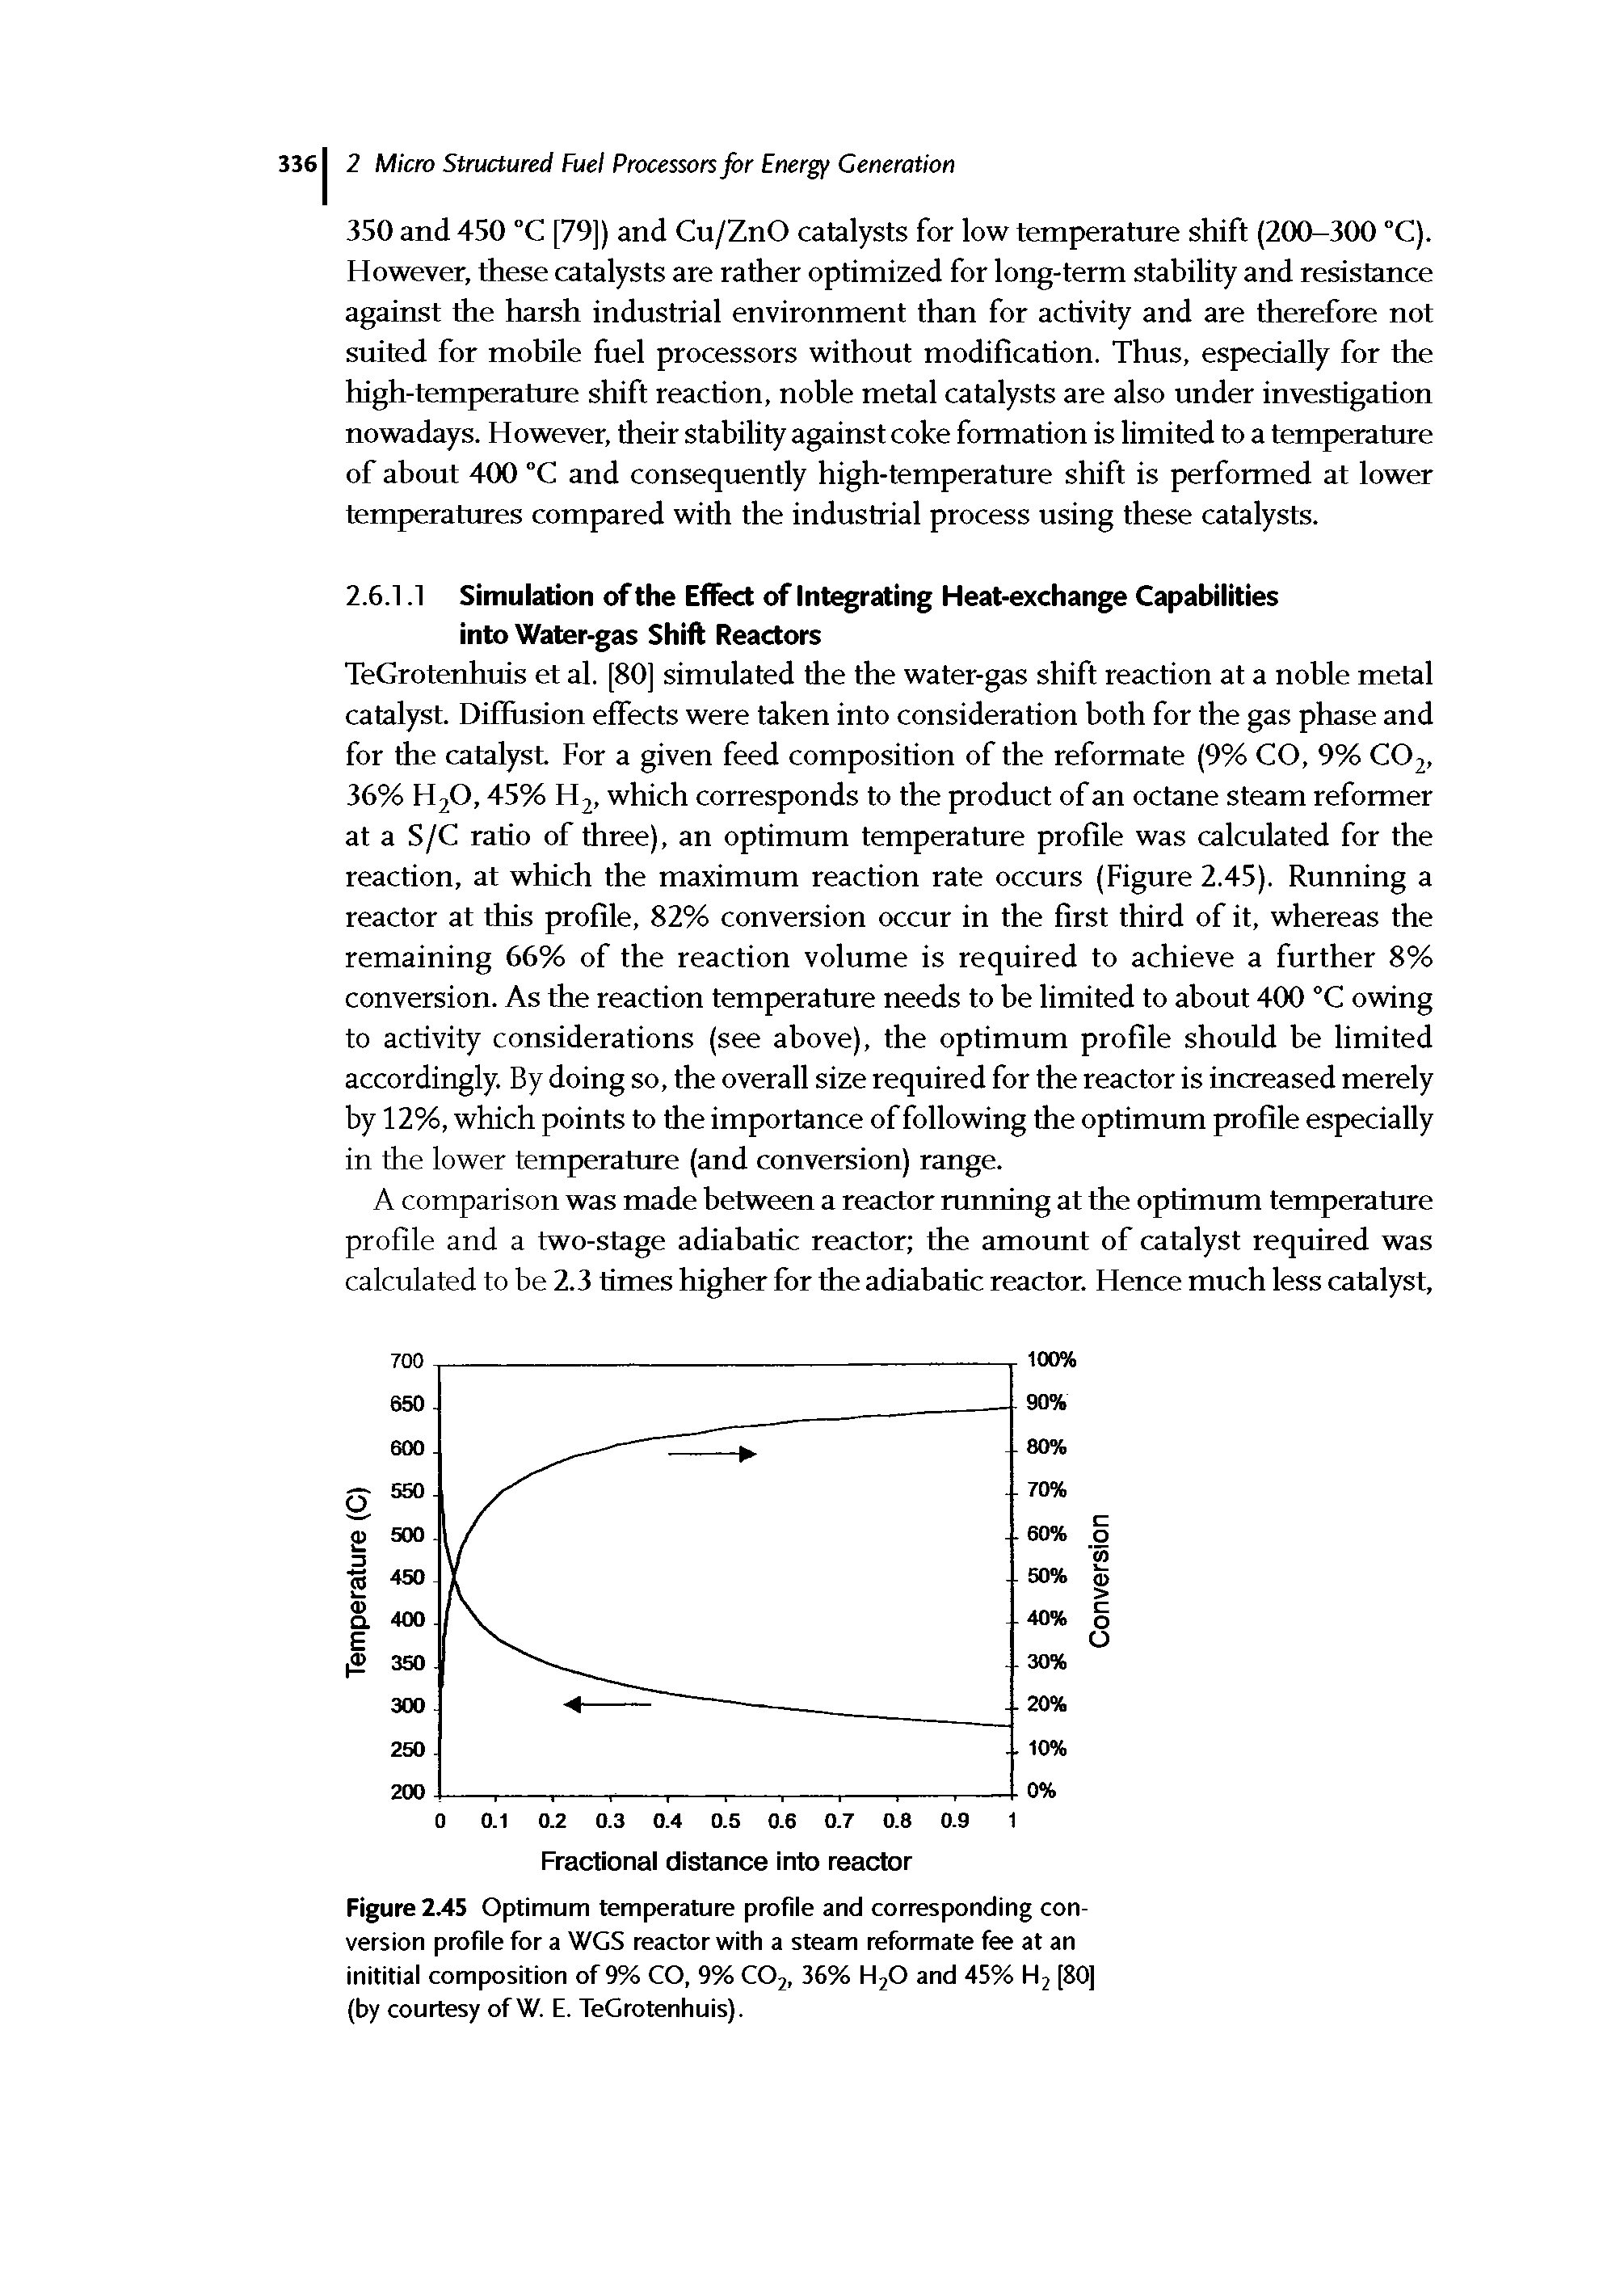 Figure 2.45 Optimum temperature profile and corresponding conversion profile for a WGS reactor with a steam reformate fee at an inititial composition of 9% CO, 9% C02, 36% H20 and 45% H2 [80] (by courtesy of W. E. TeGrotenhuis).